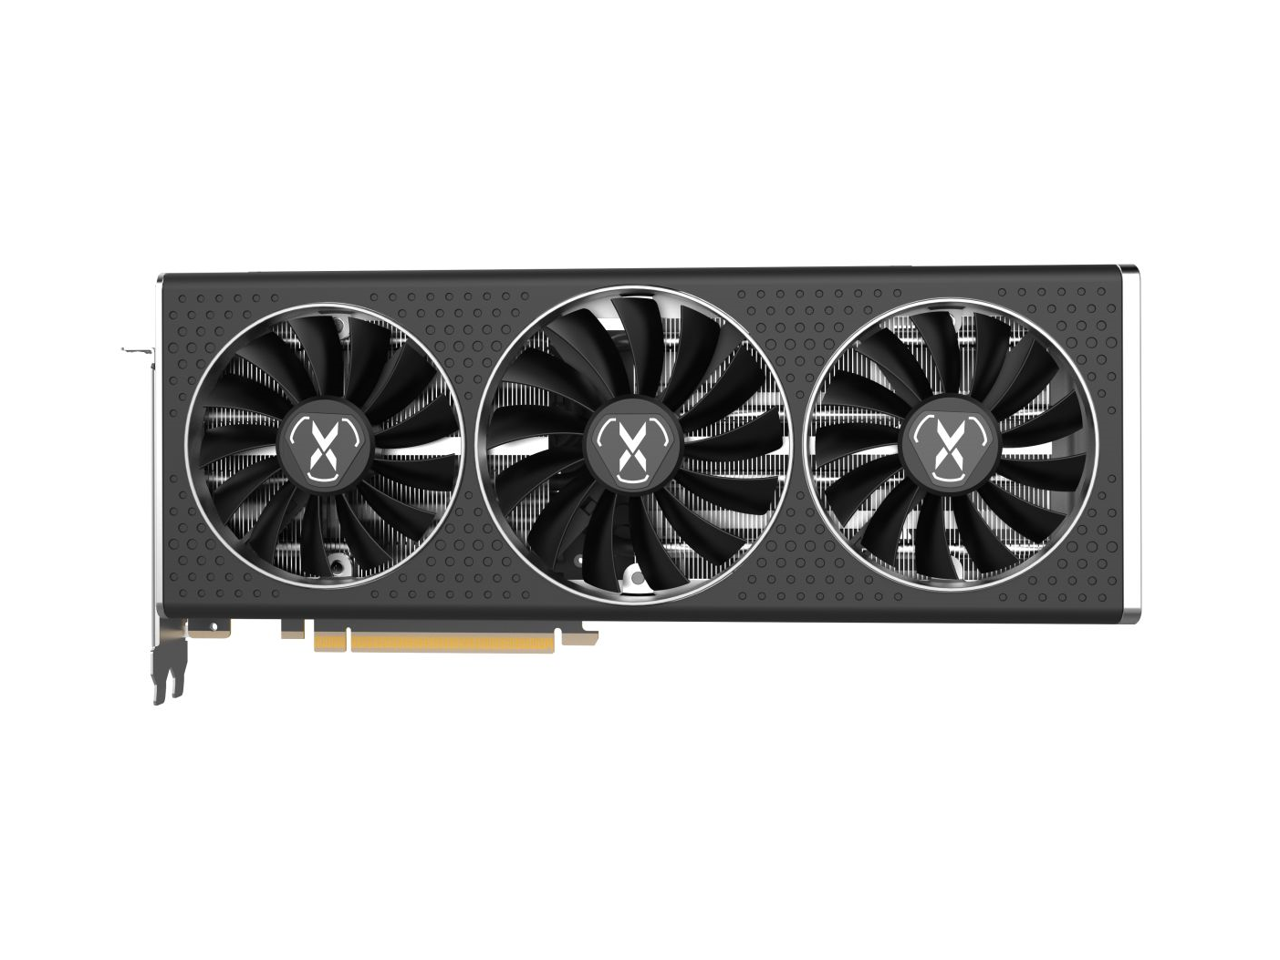 XFX Speedster QICK319 Radeon RX 6750 XT CORE Gaming Graphics Card $295 + Free Shipping